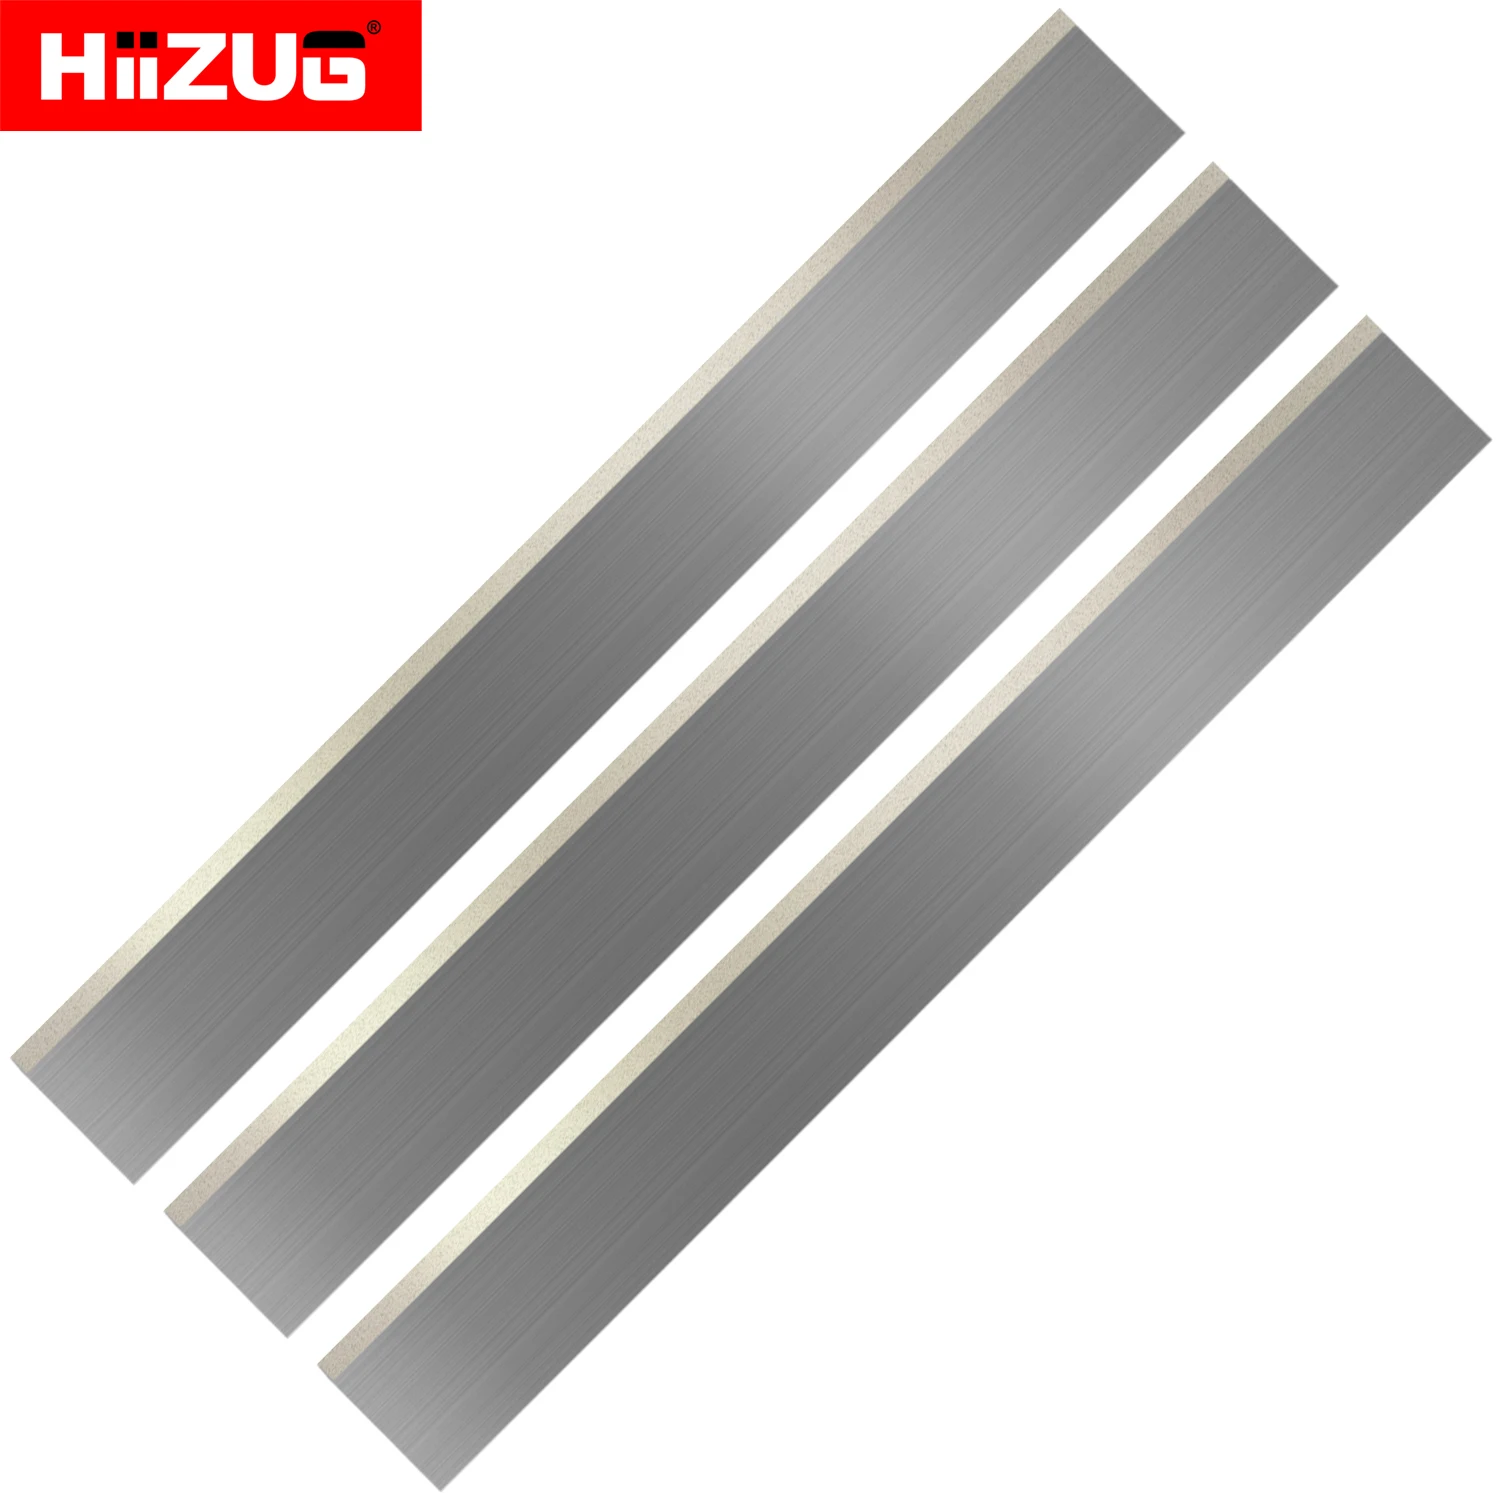 

11 Inch 280mm Resharpenable Planer Blades Knives for Thicknesser Planer Jointer HSS TCT Width 40mm Set of 3 PCS